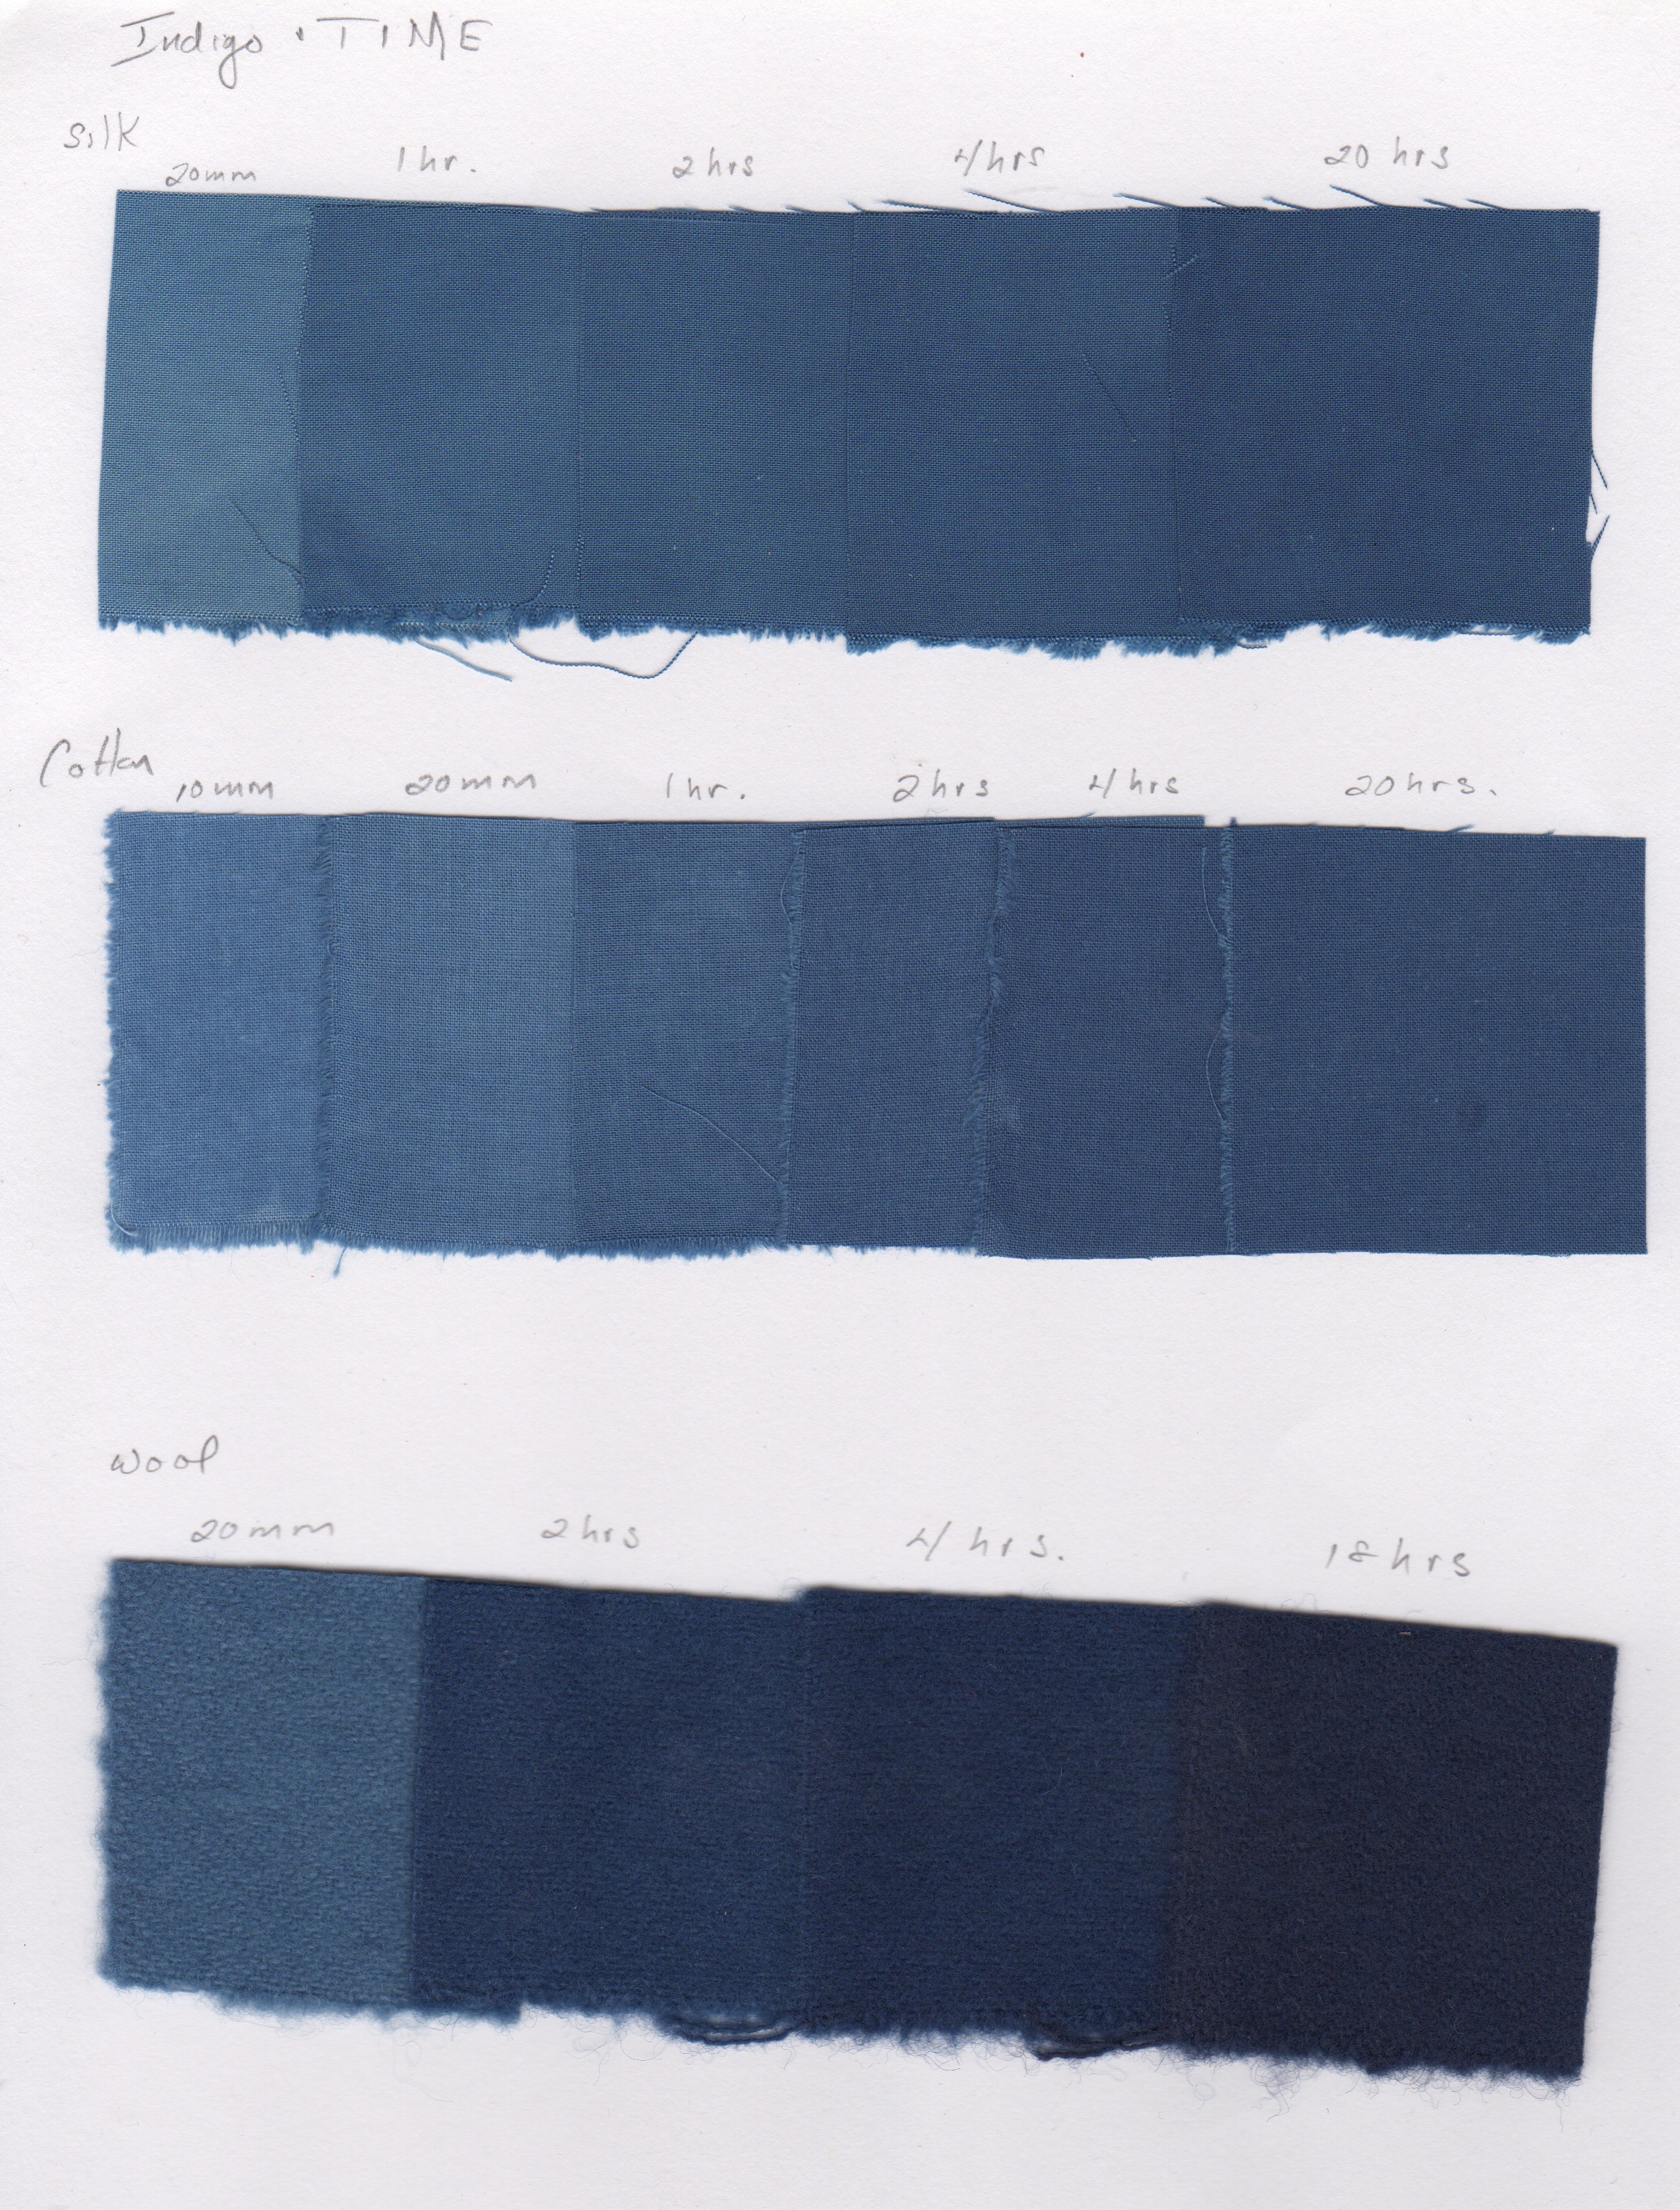 Indigo Dyeing: Time and Patience  Natural Dye: Experiments and